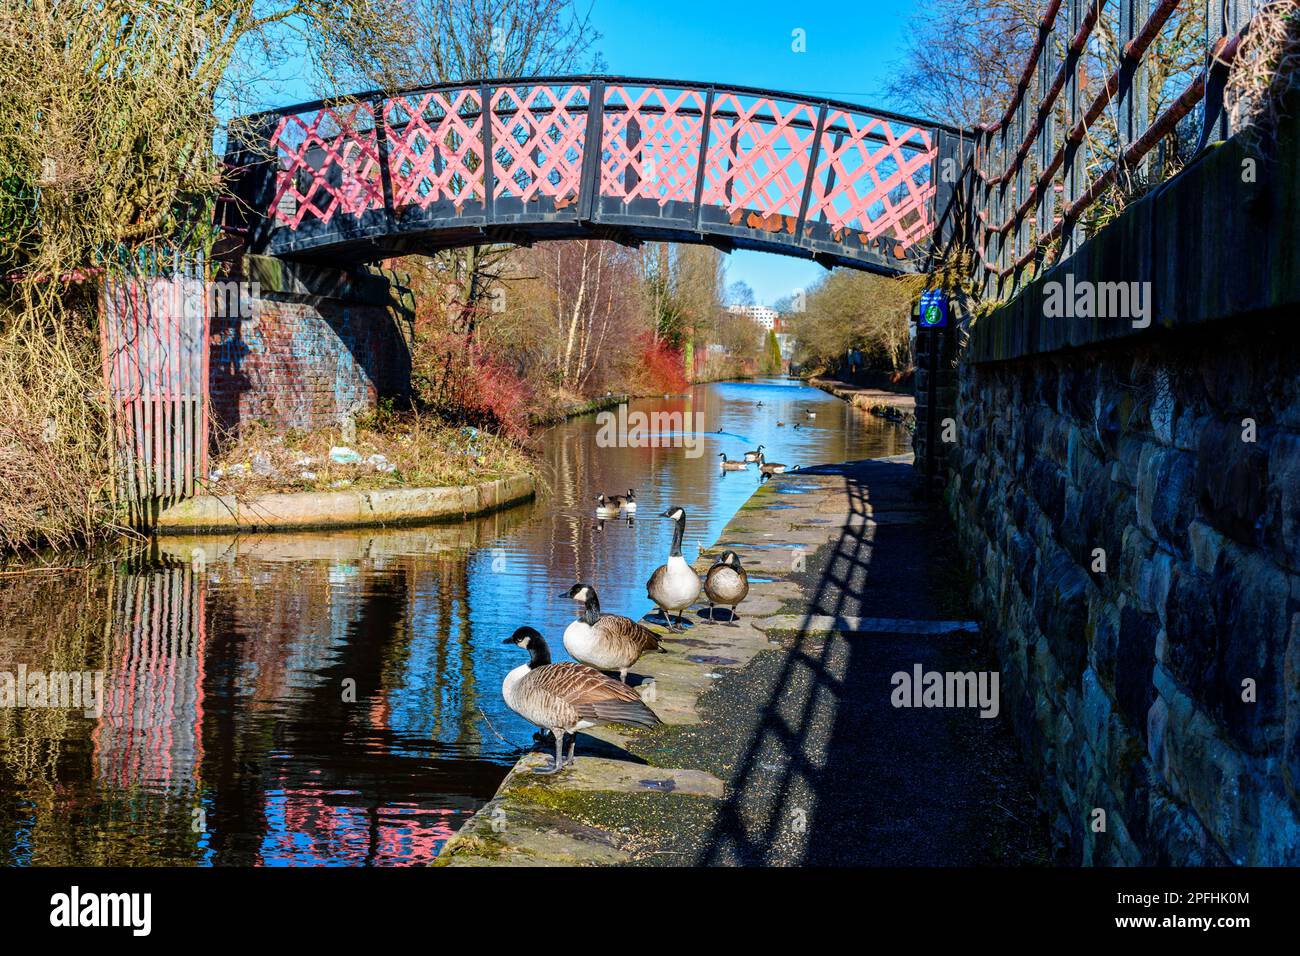 Geese perched below an arched iron footbridge reflected in the Ashton Canal at Ashton-under-Lyne, Tameside, Manchester, UK Stock Photo